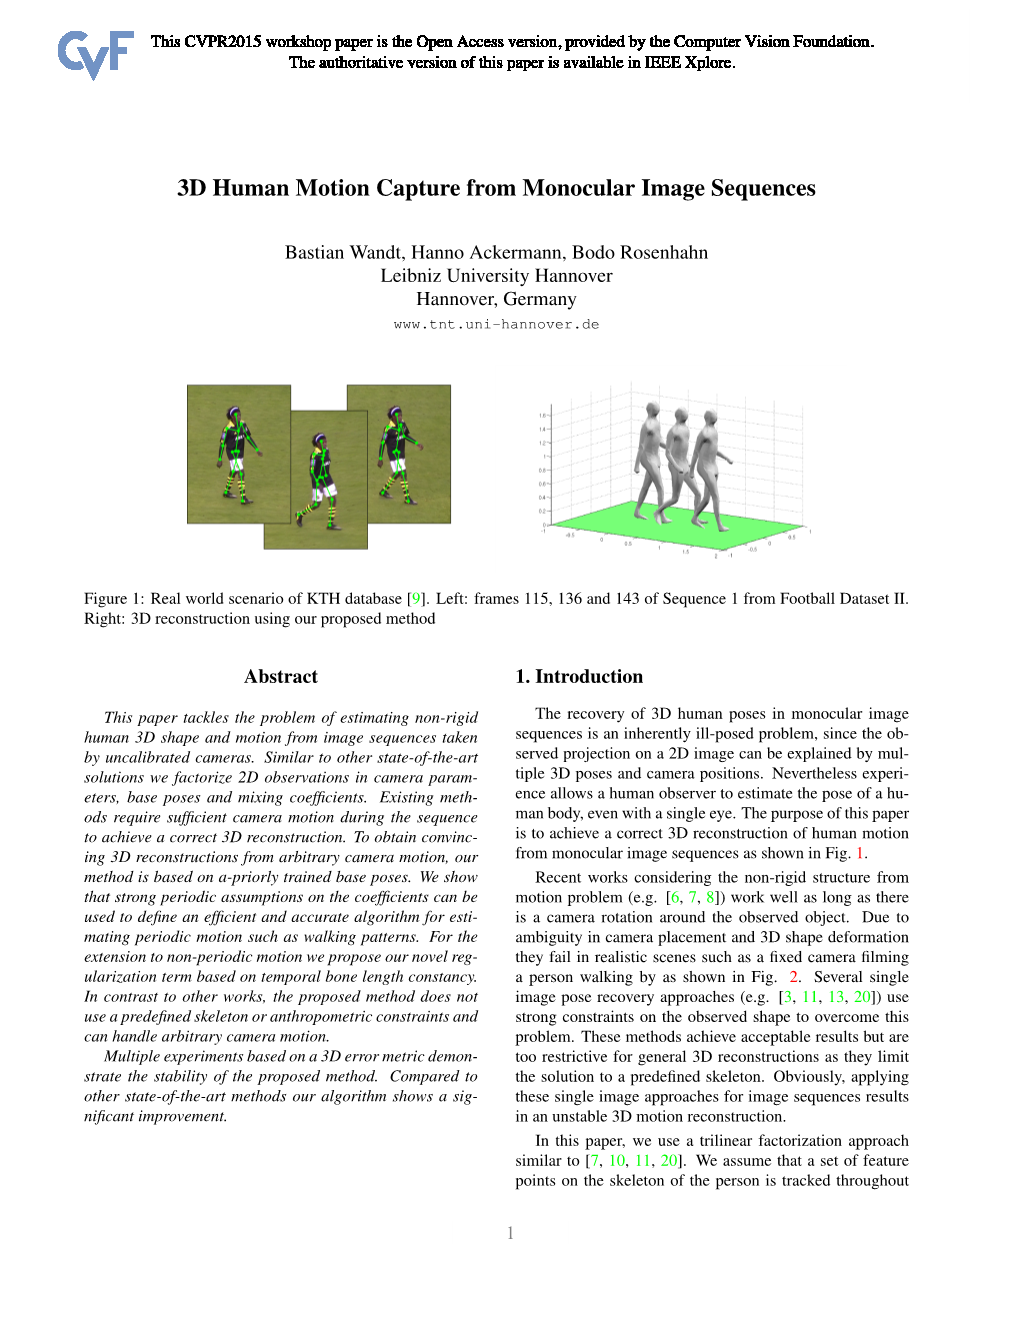 3D Human Motion Capture from Monocular Image Sequences